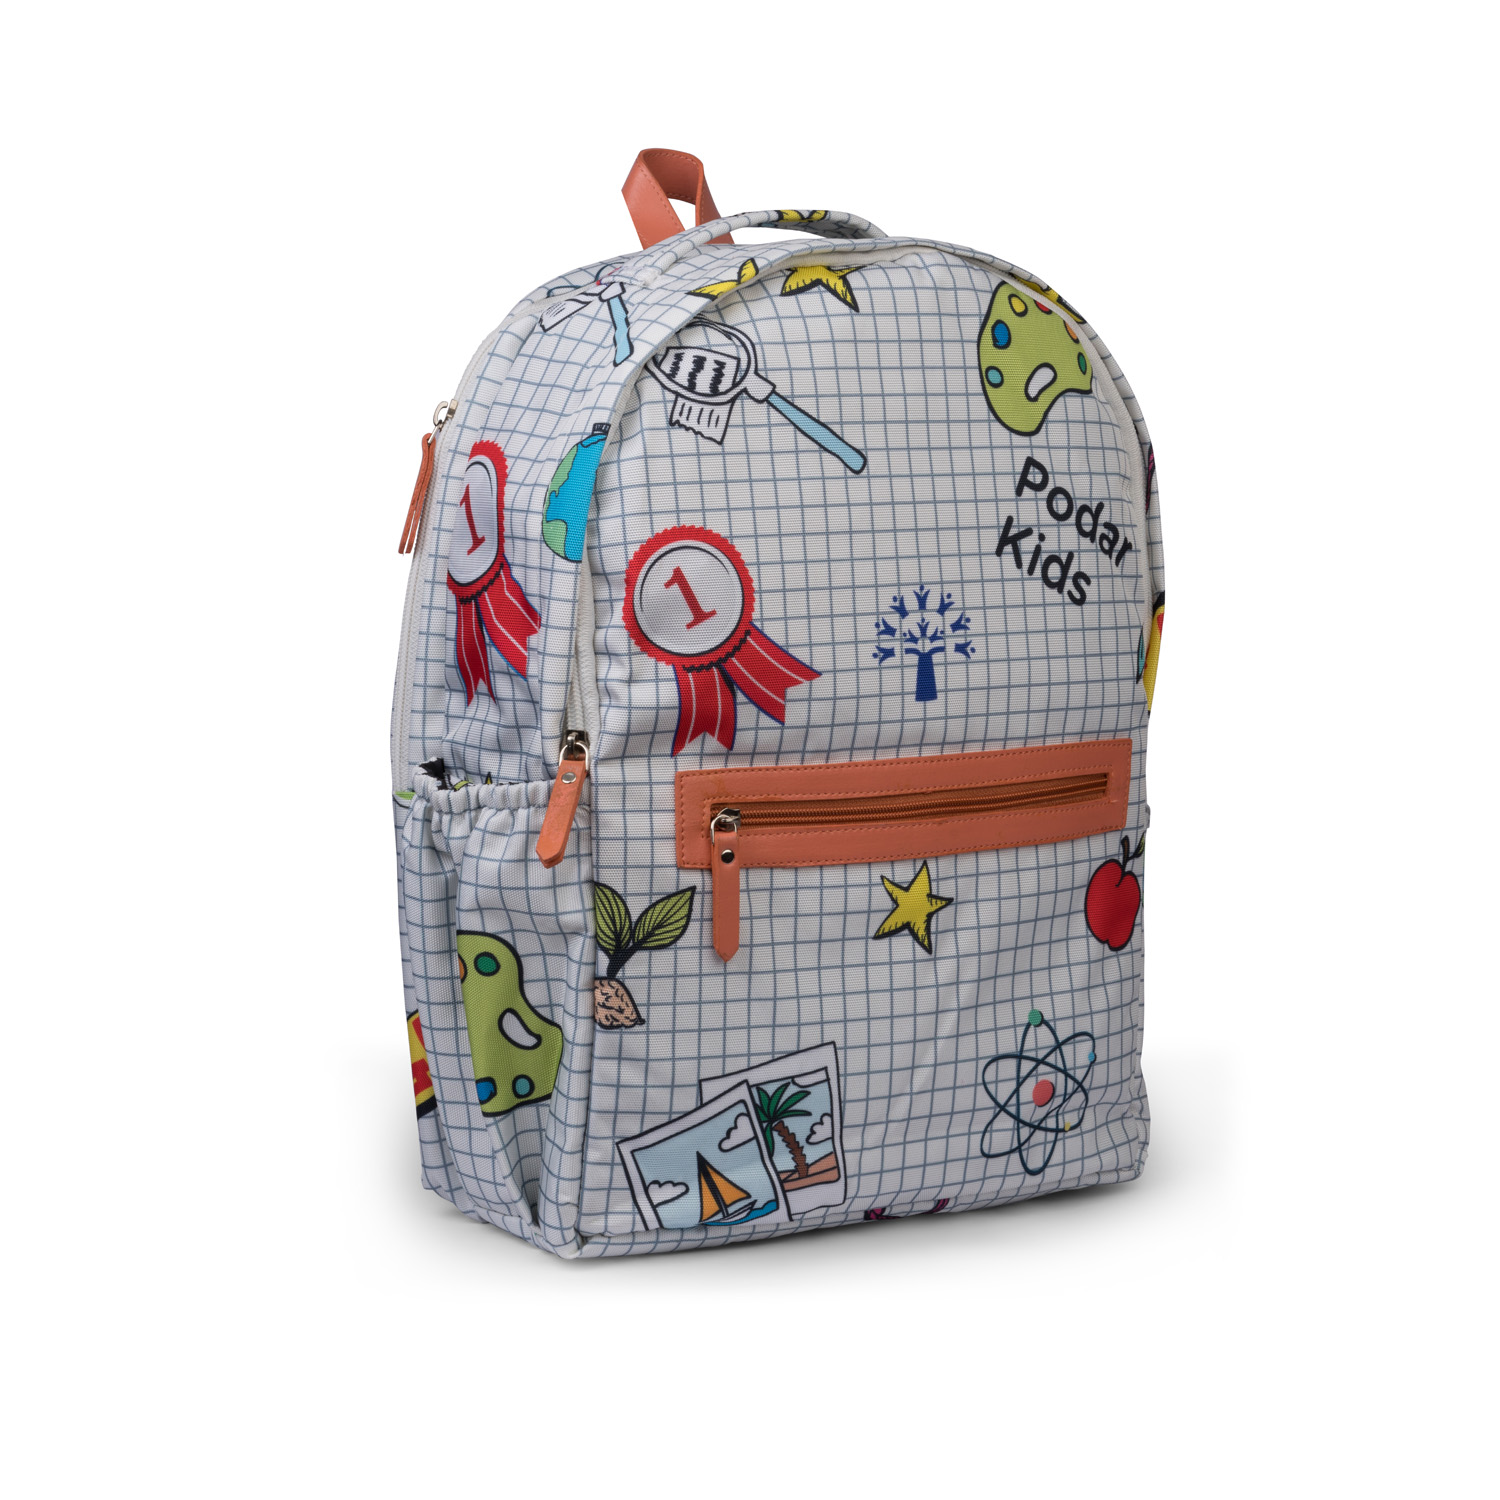 Best School Bags and Backpacks | M&S